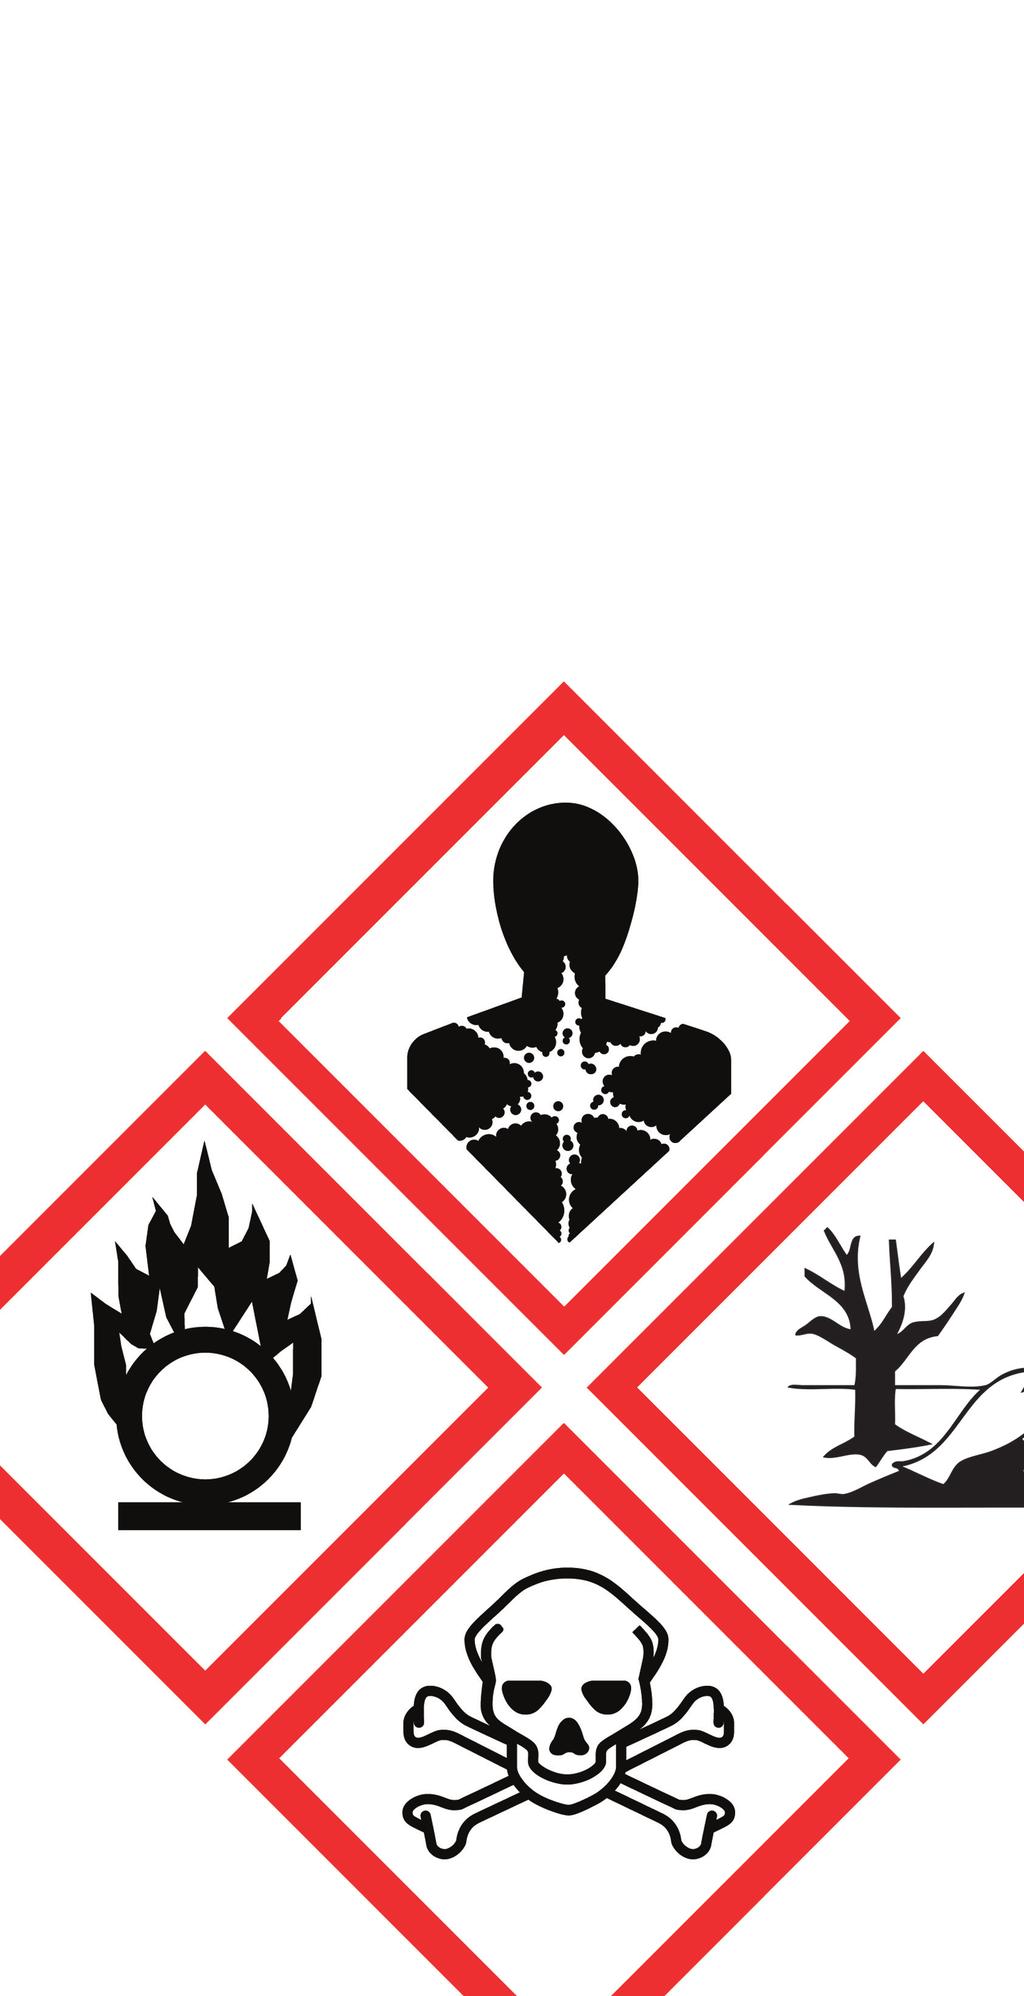 WEBINARS Hazard Communication Teaches employees the safe use and handling of hazardous chemicals in the workplace and how to protect themselves and others from those hazards.